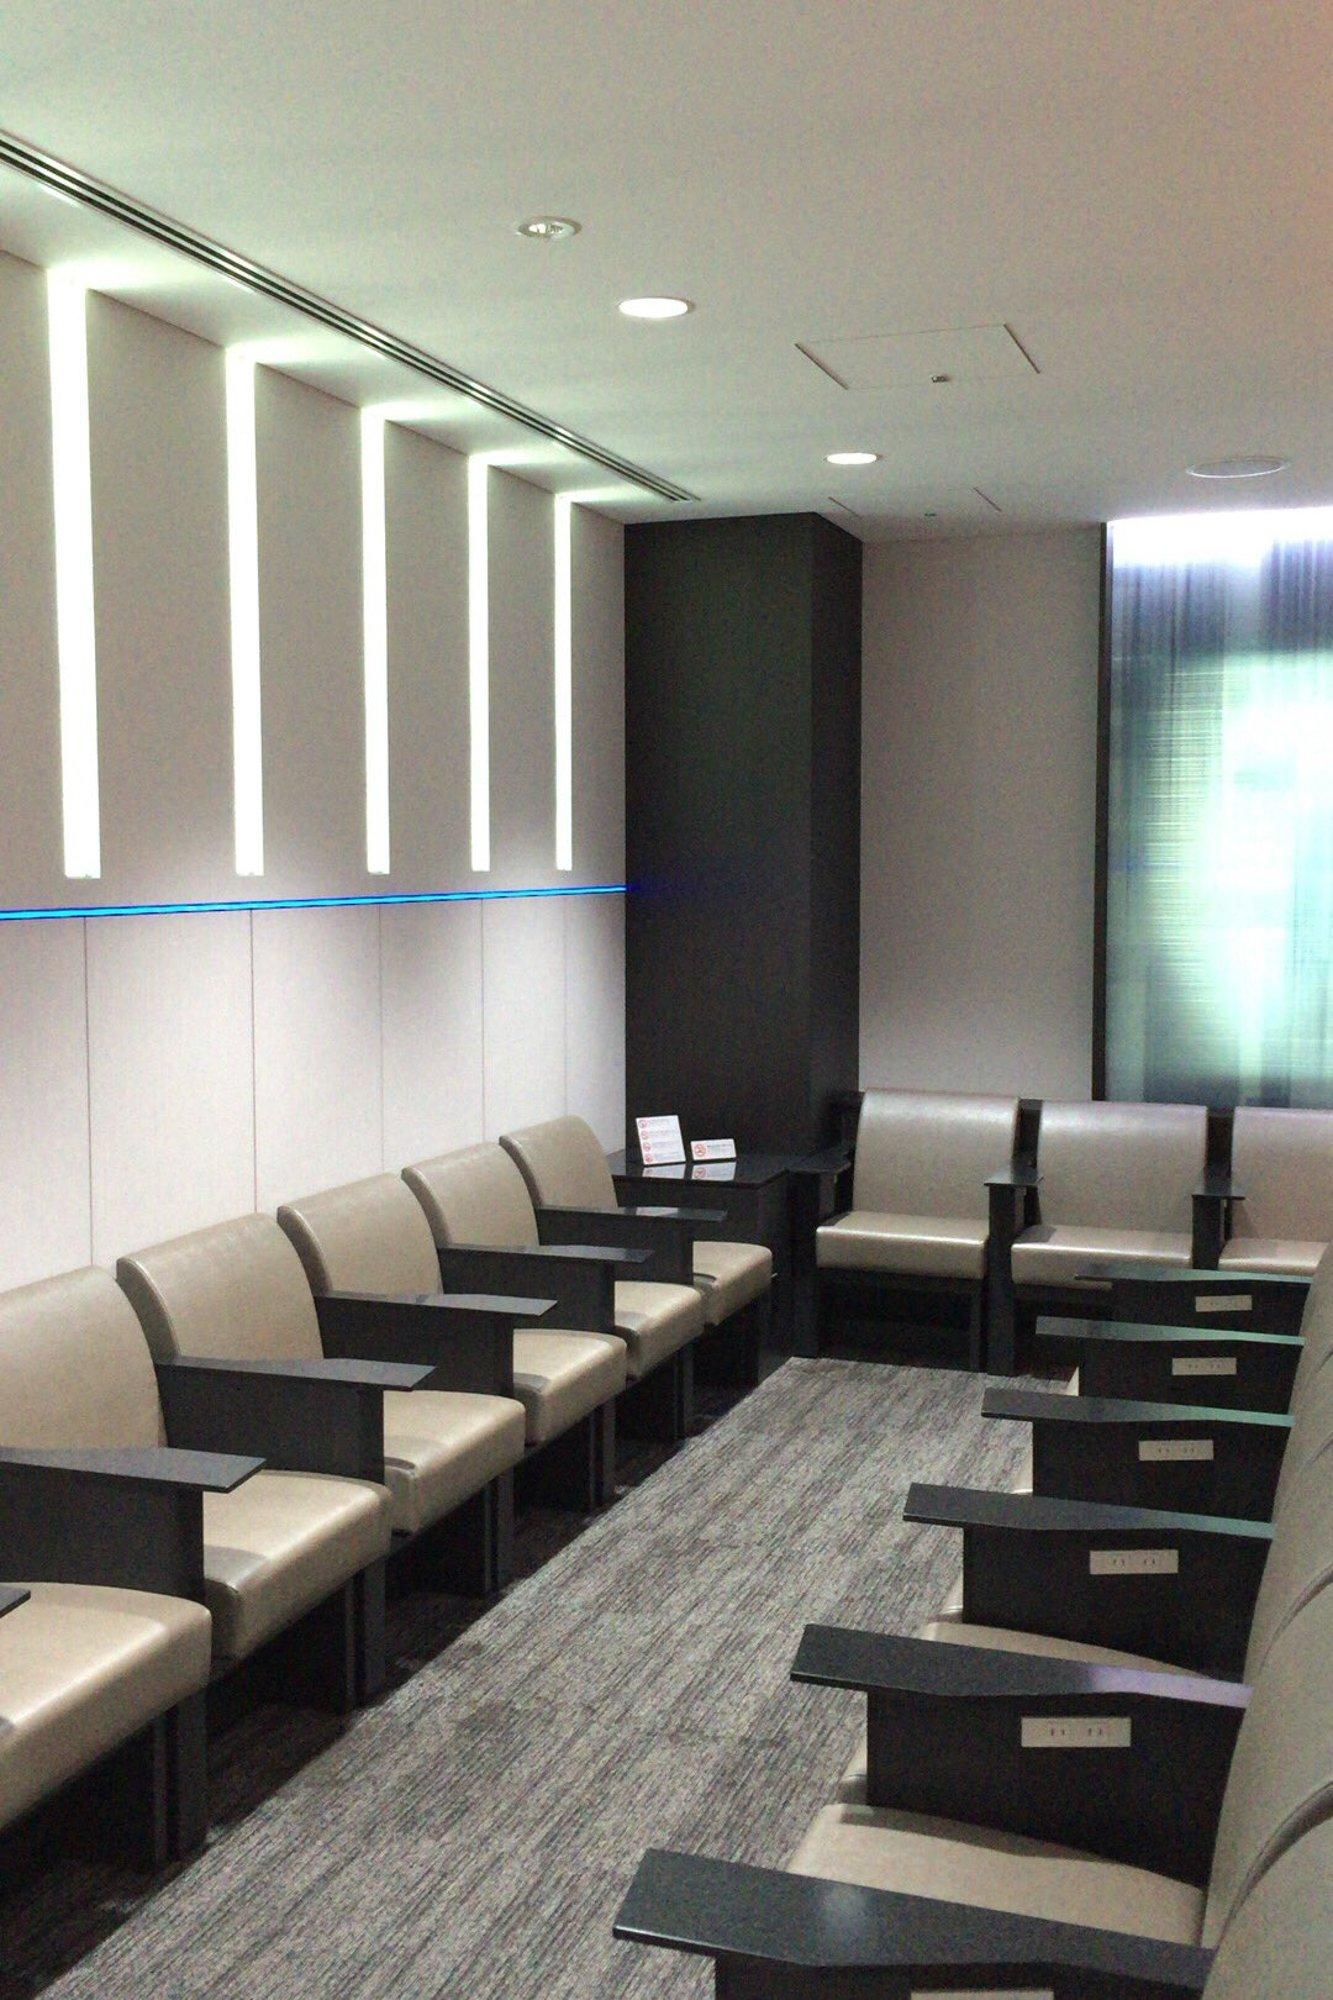 All Nippon Airways ANA Lounge image 7 of 9